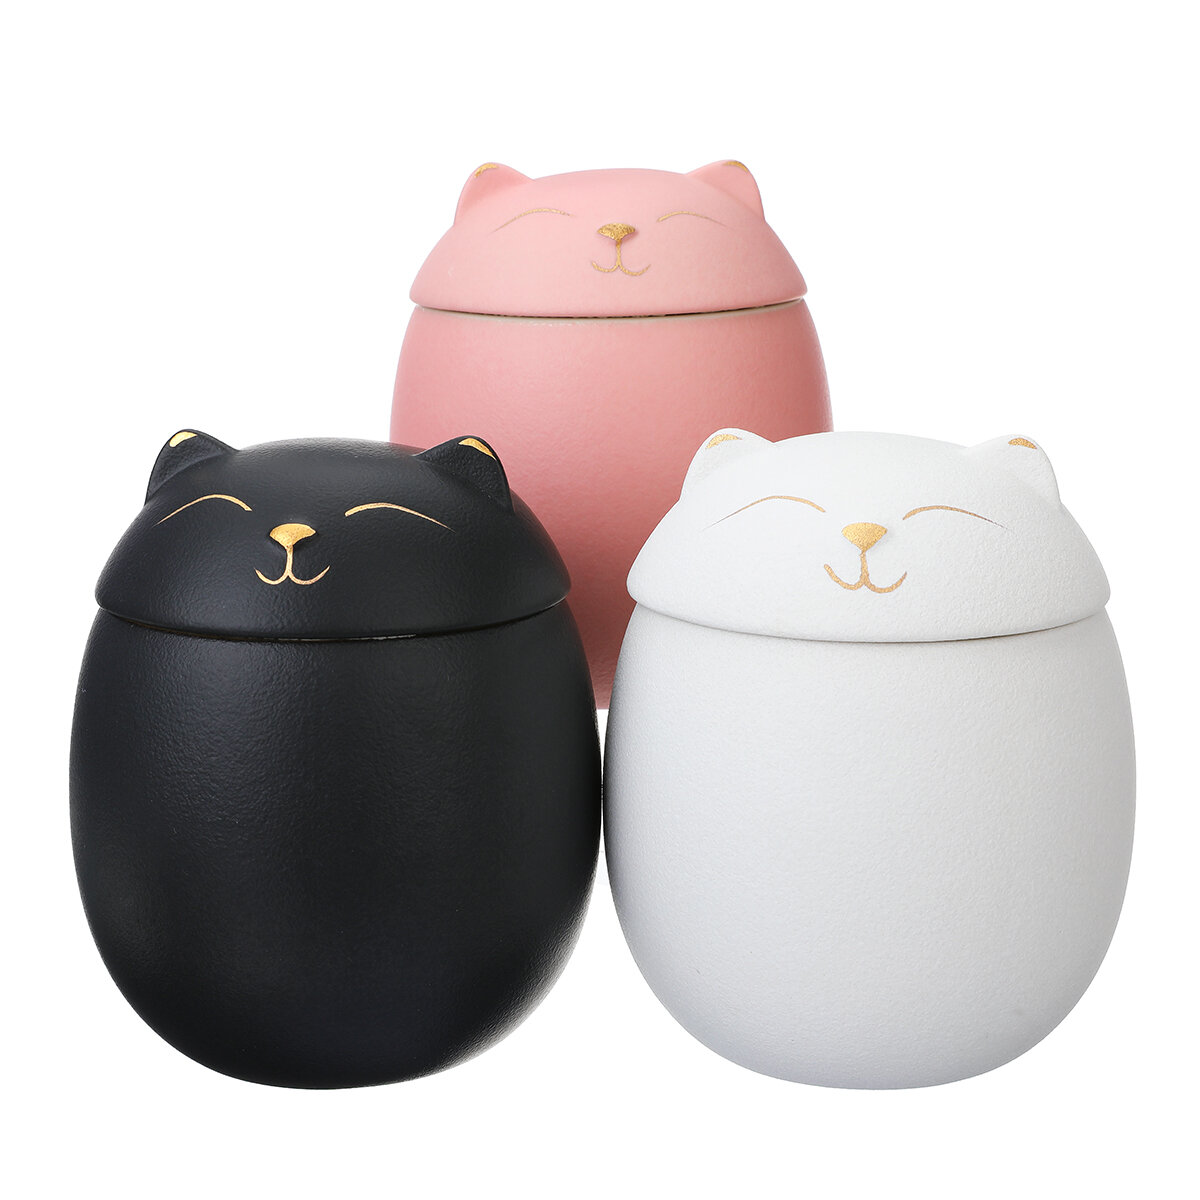 500ml Urn for Pet Ashes Cat Shape Memorial Cremation Urns-Handcrafted Black Decorative Urns for Fune